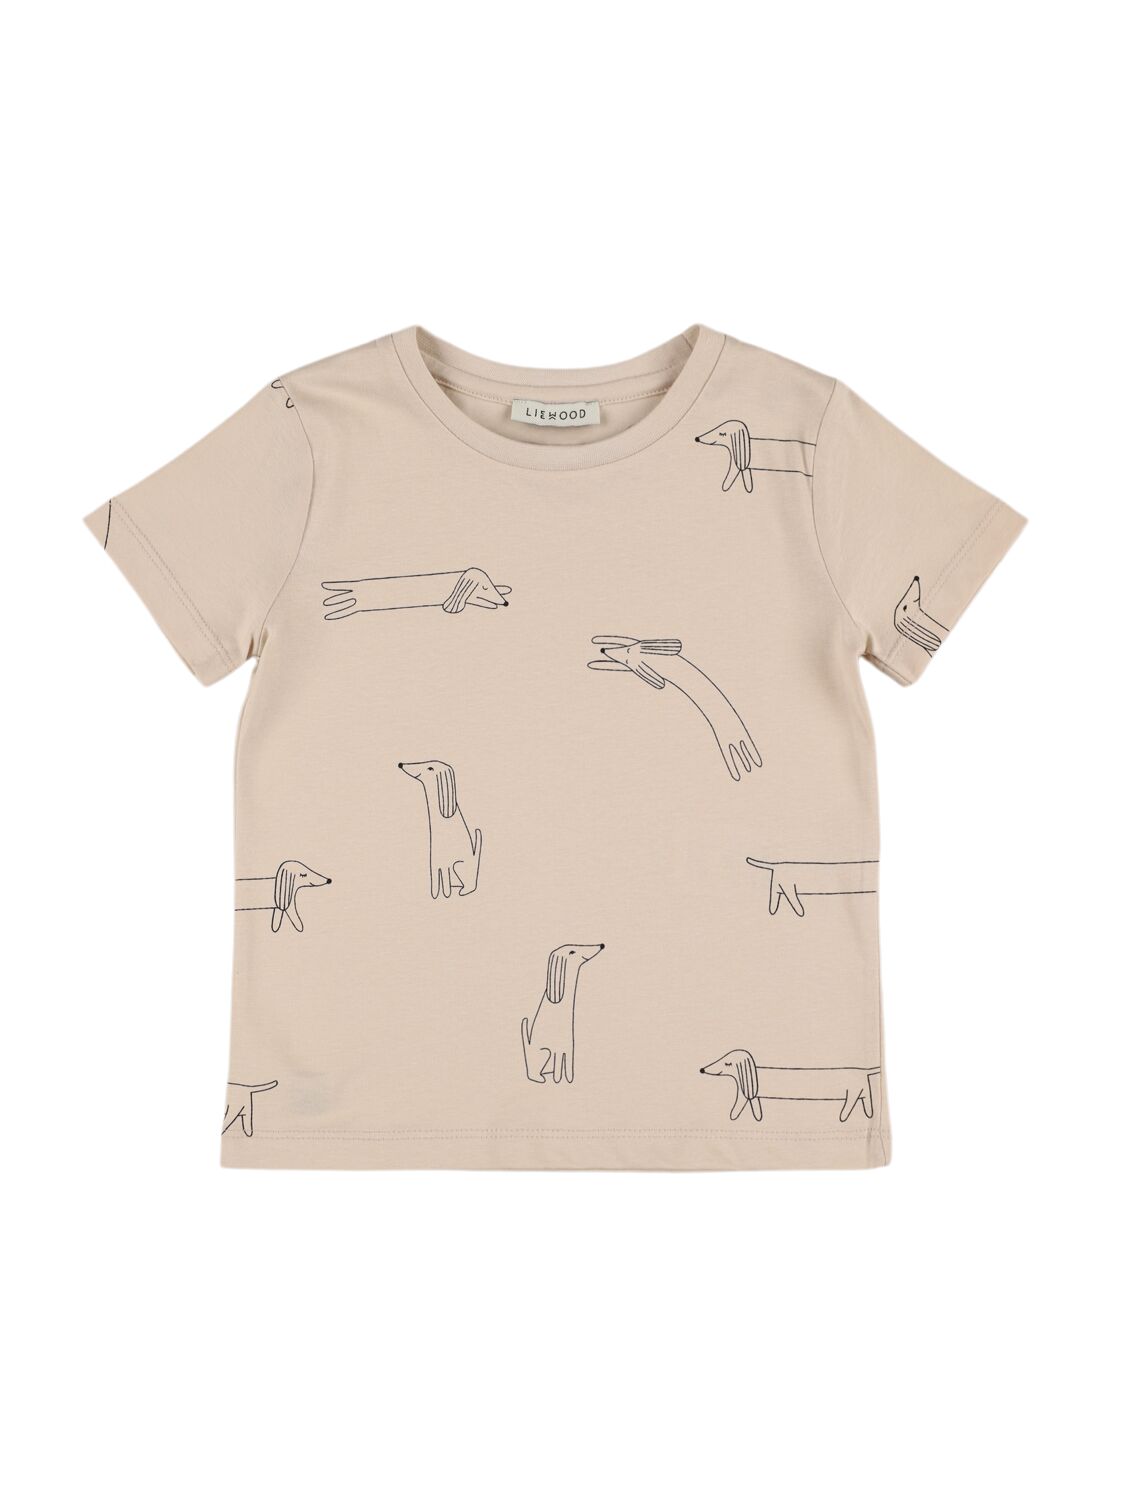 Liewood Kids' Printed Cotton & Lycra T-shirt In Off White